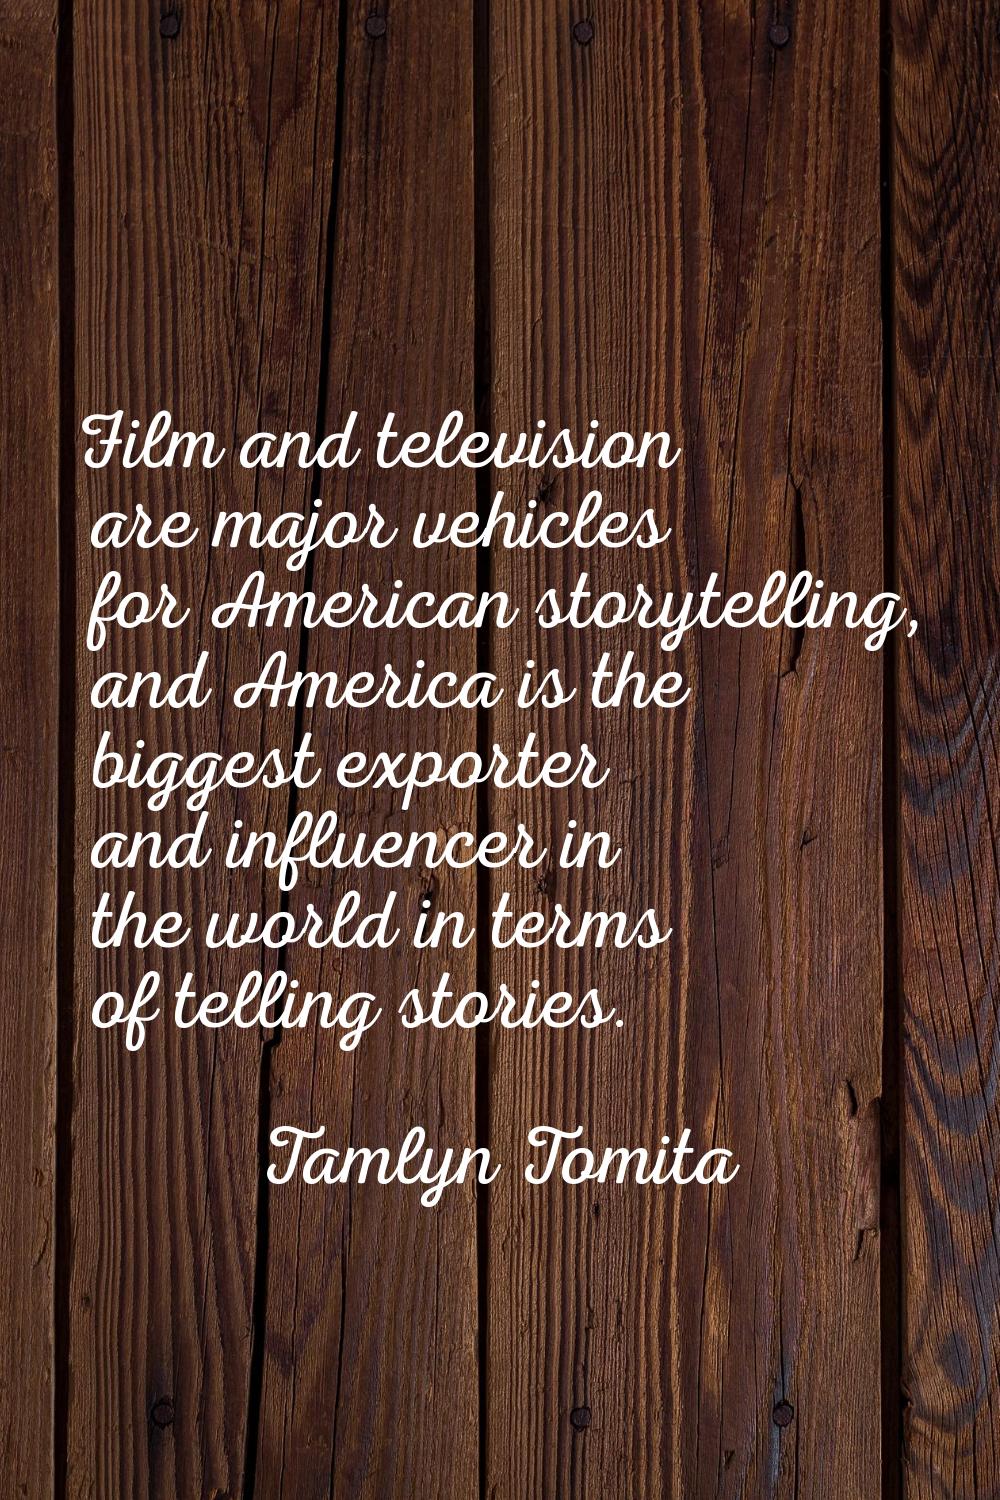 Film and television are major vehicles for American storytelling, and America is the biggest export